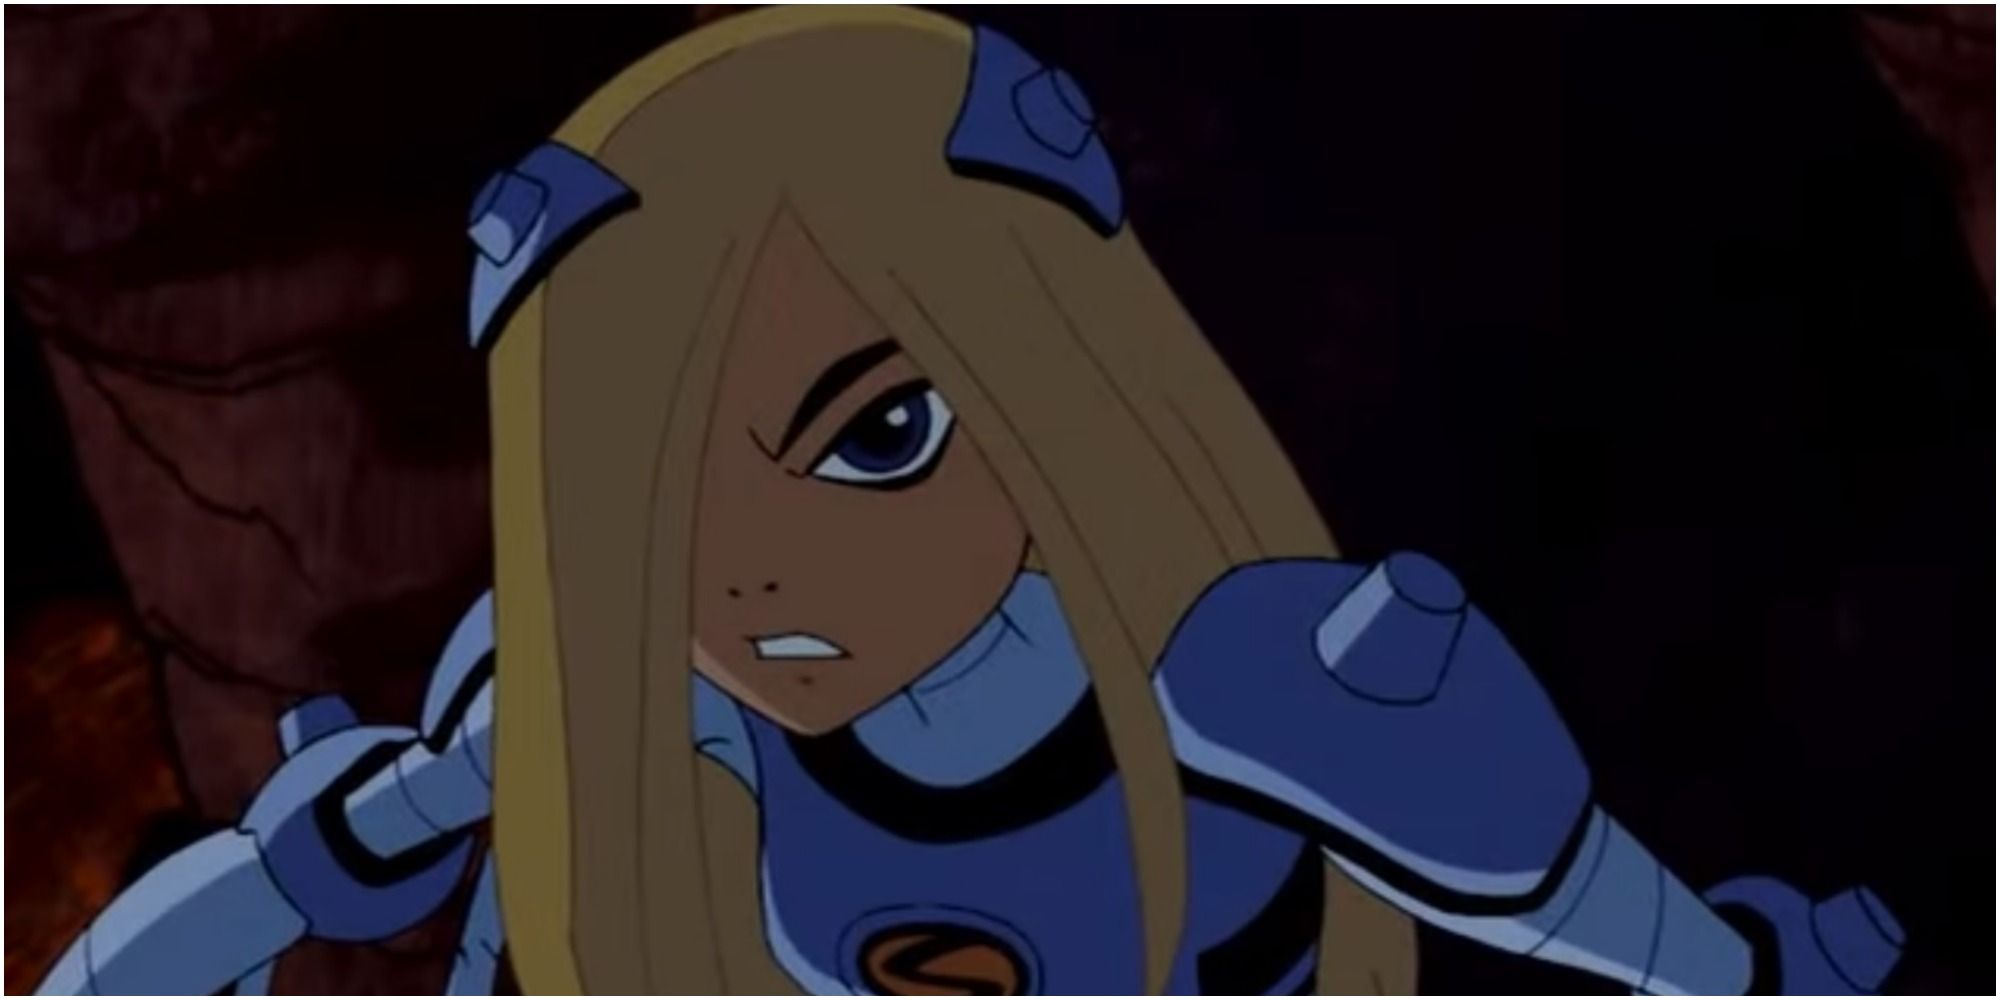 Terra in the Teen Titans animated series